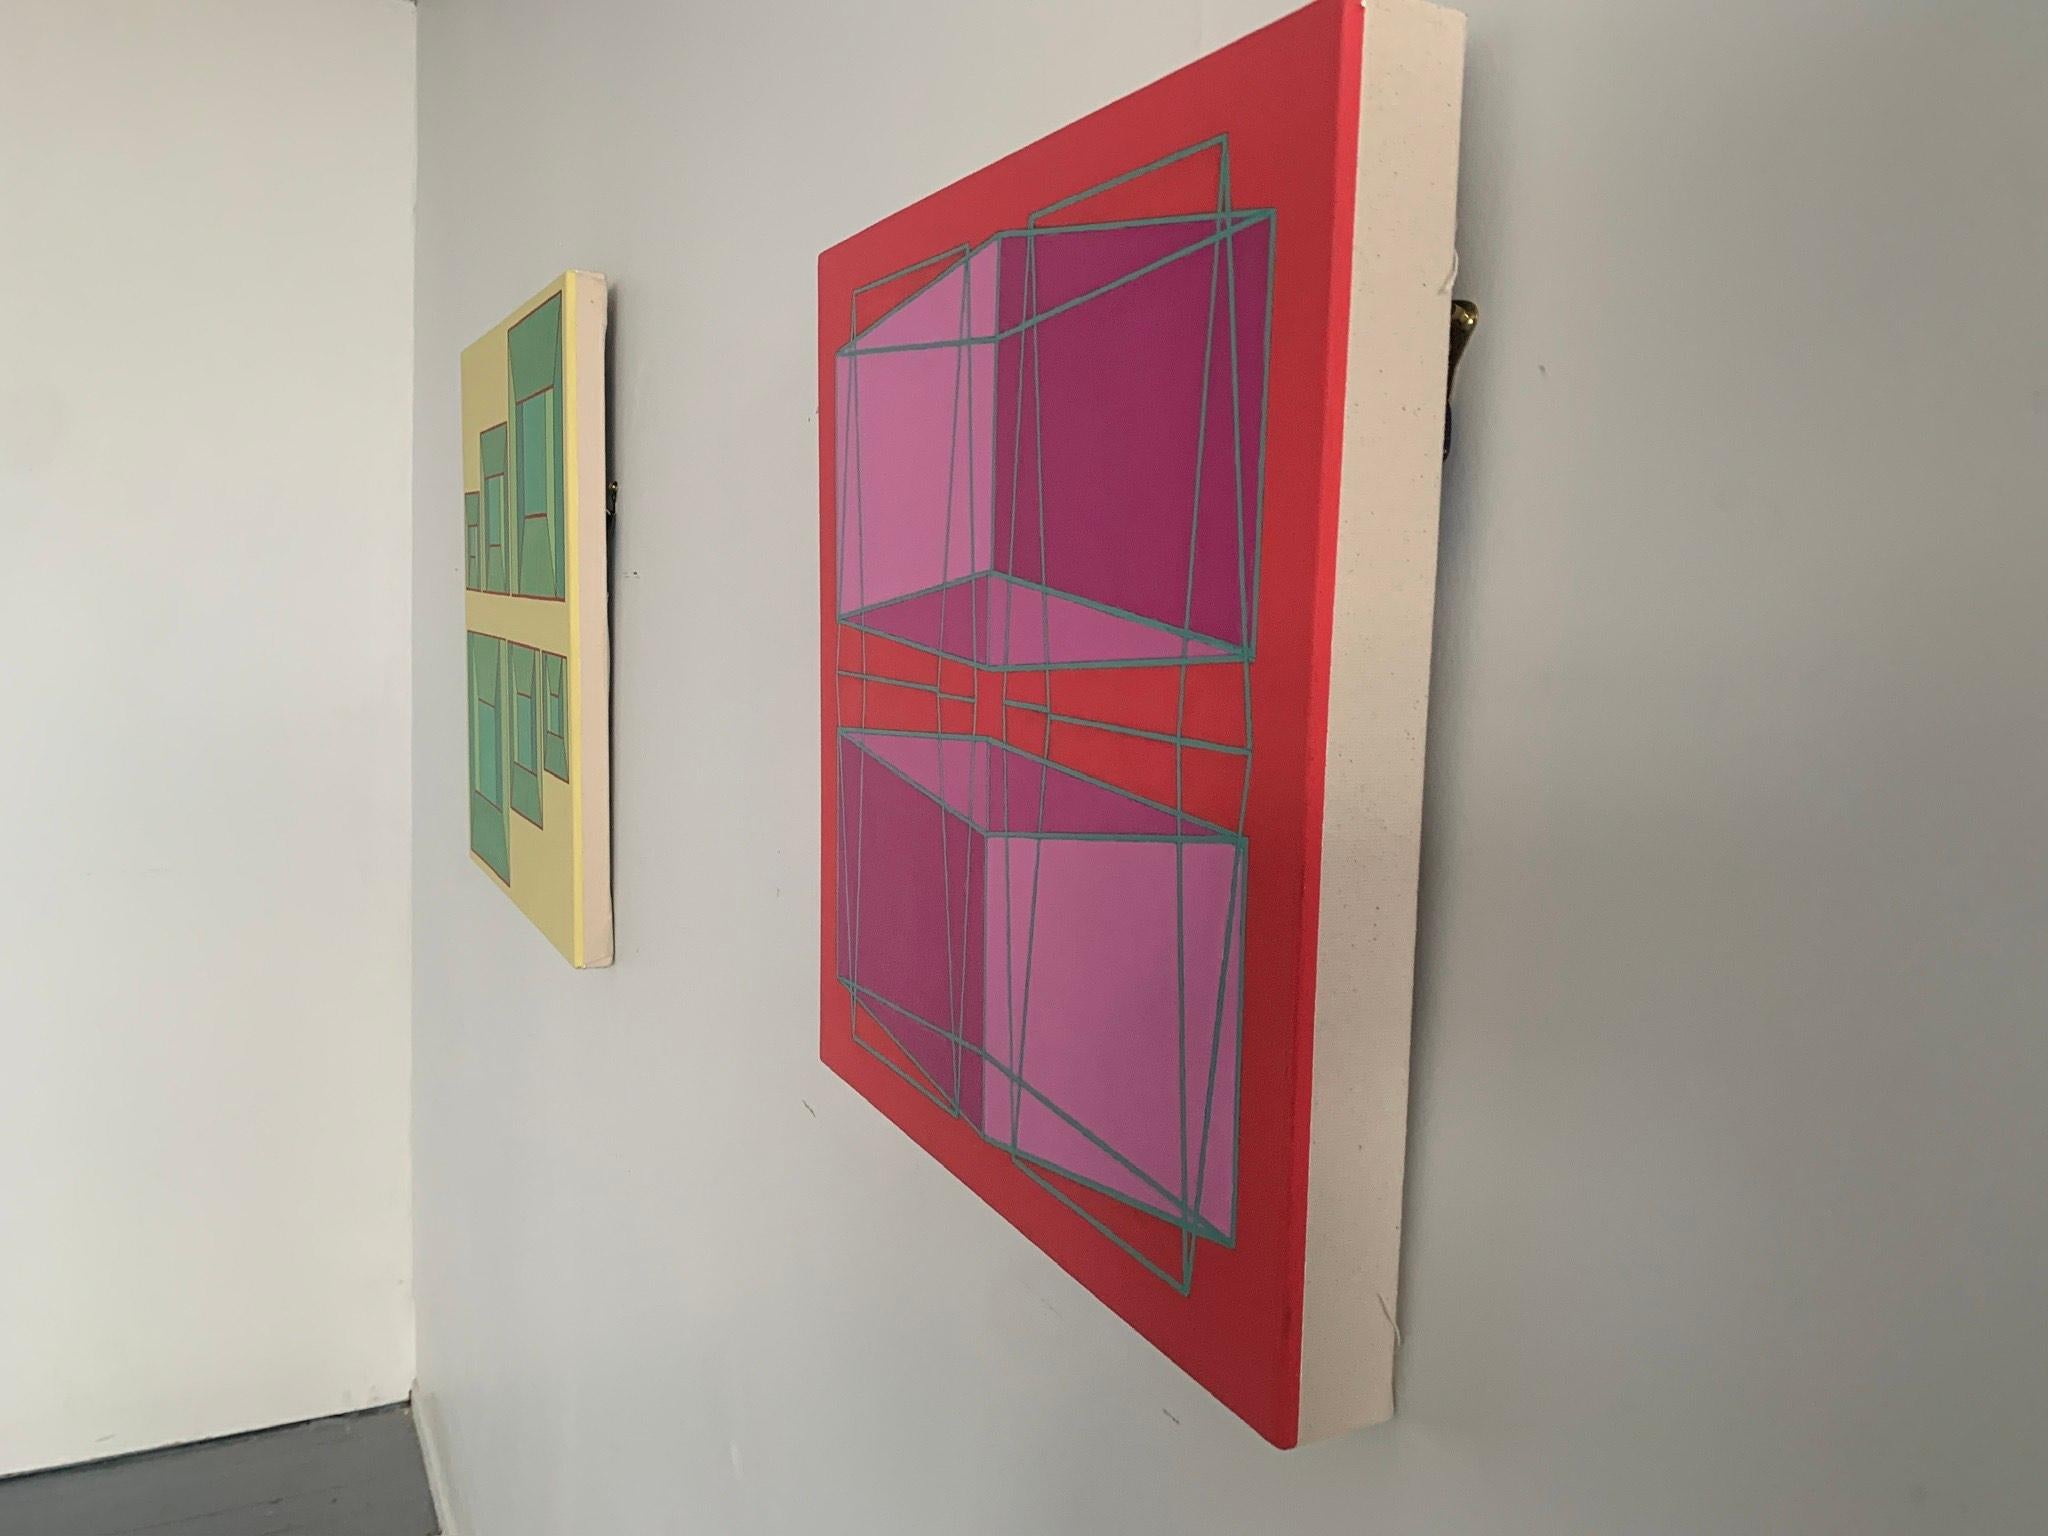 Benjamin Weaver creates spatial tension through his use of contrasting colors arranged in a geometric framework. Imagery and color work both with and against each other to create movement within the composition. By the artist’s careful placement of